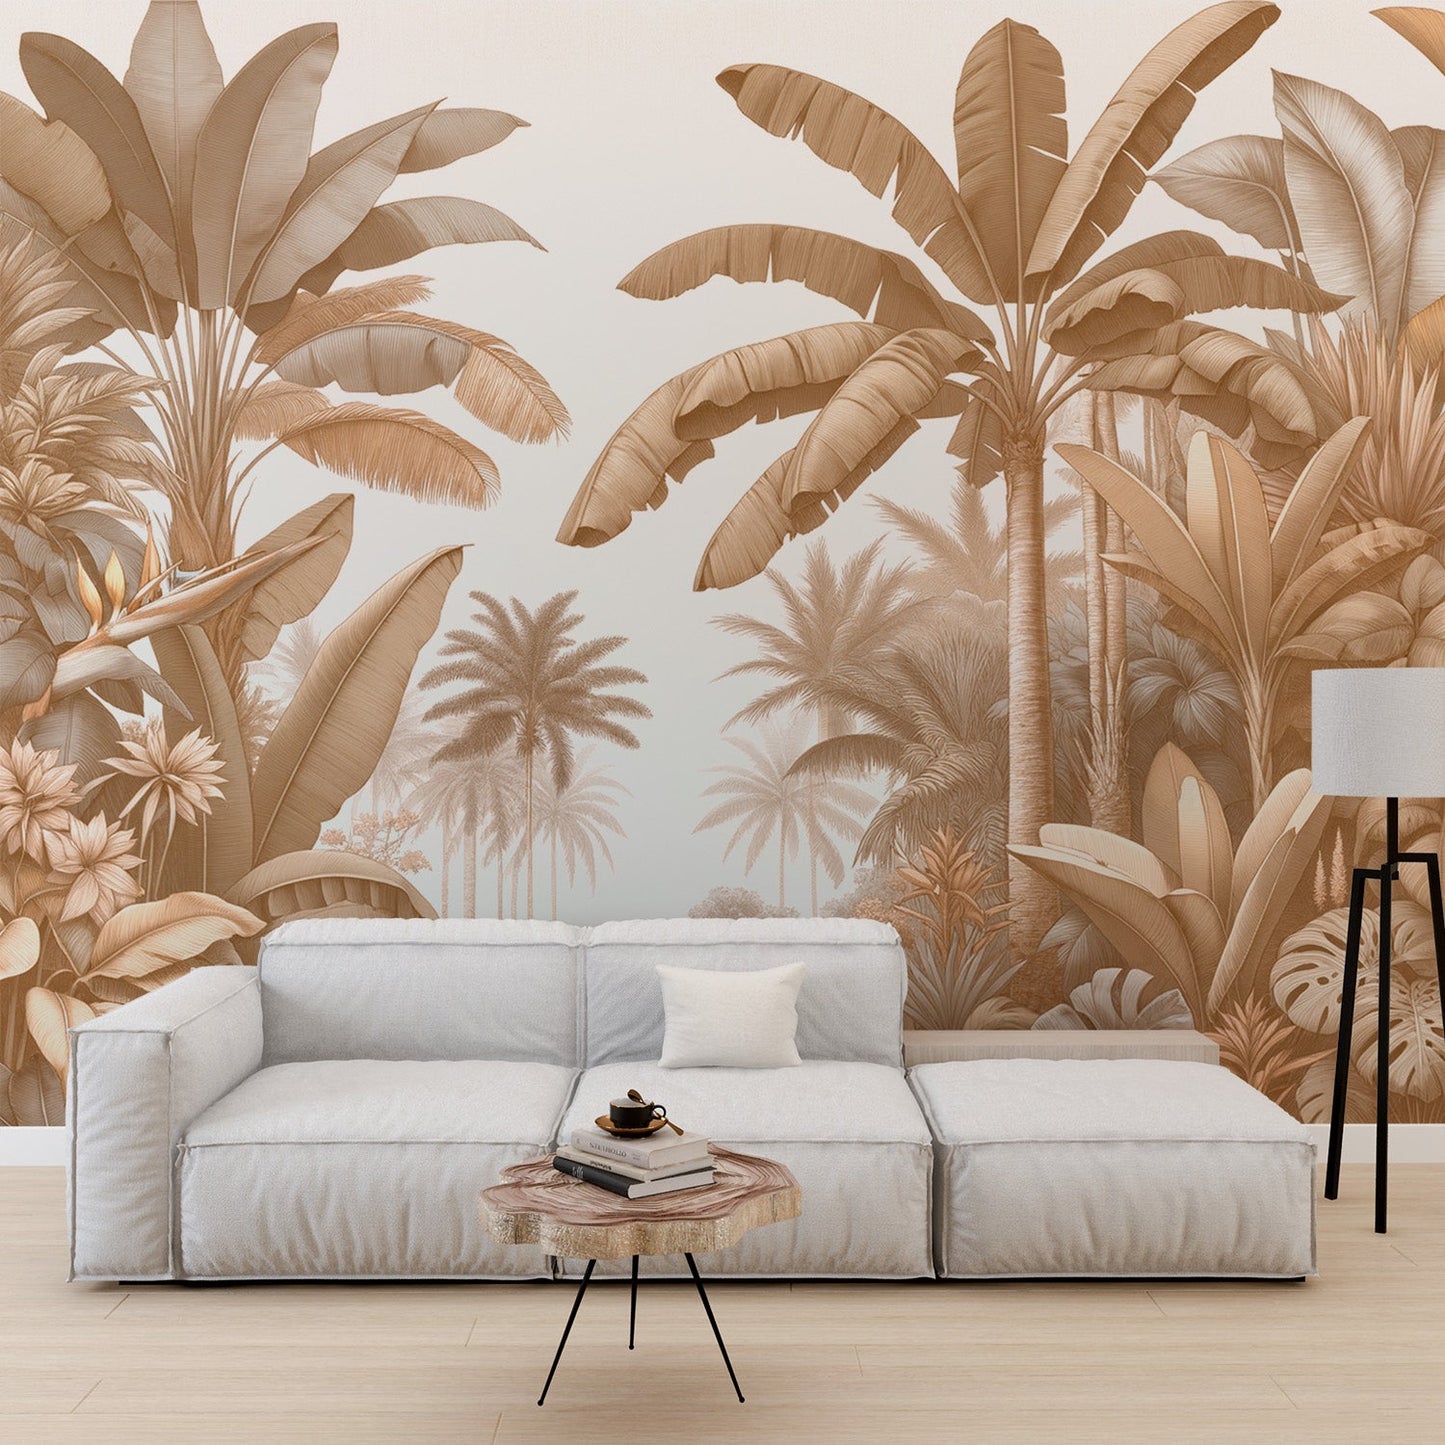 Beige jungle wallpaper | Palm trees and banana trees on white background